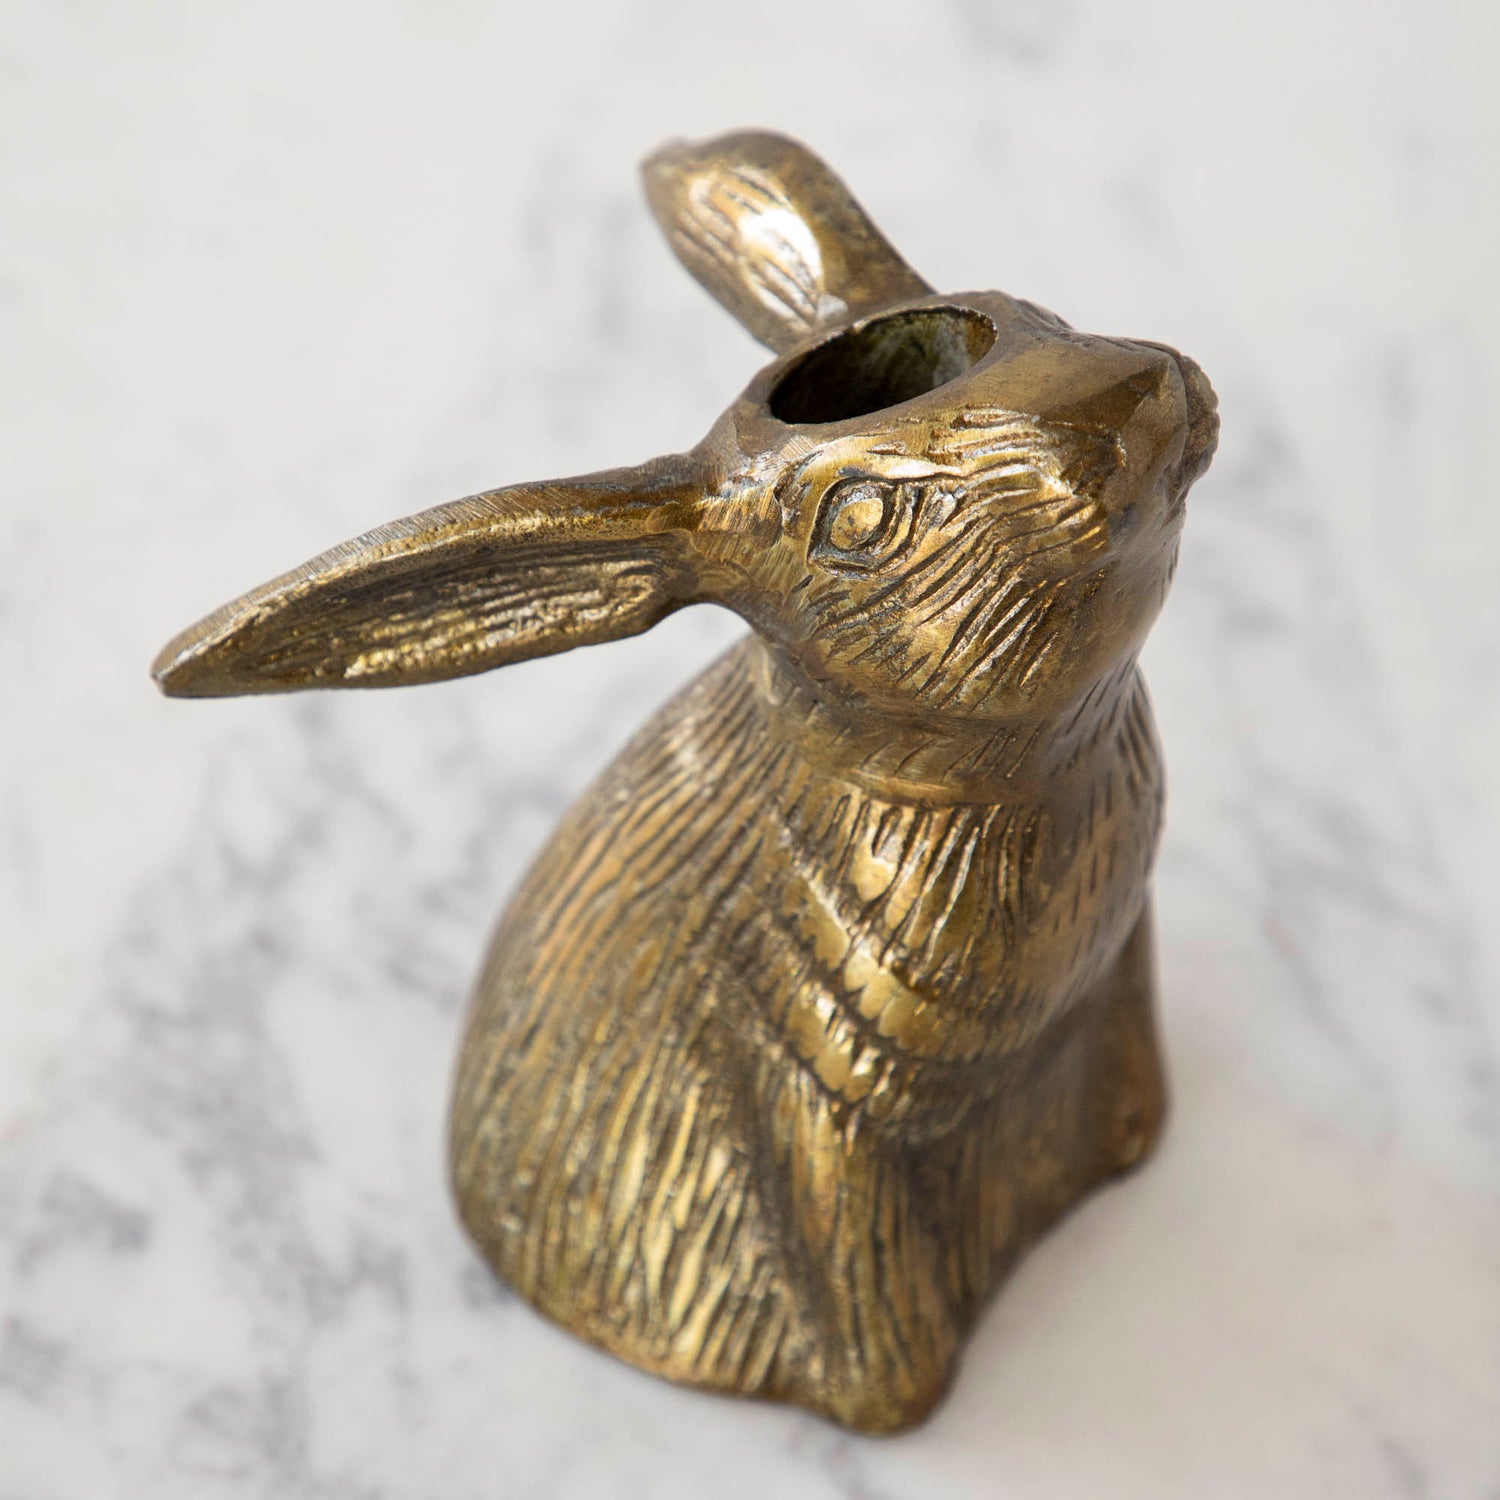 Halcyon Hare Taper Candleholders by Accent Decor on a wooden board.